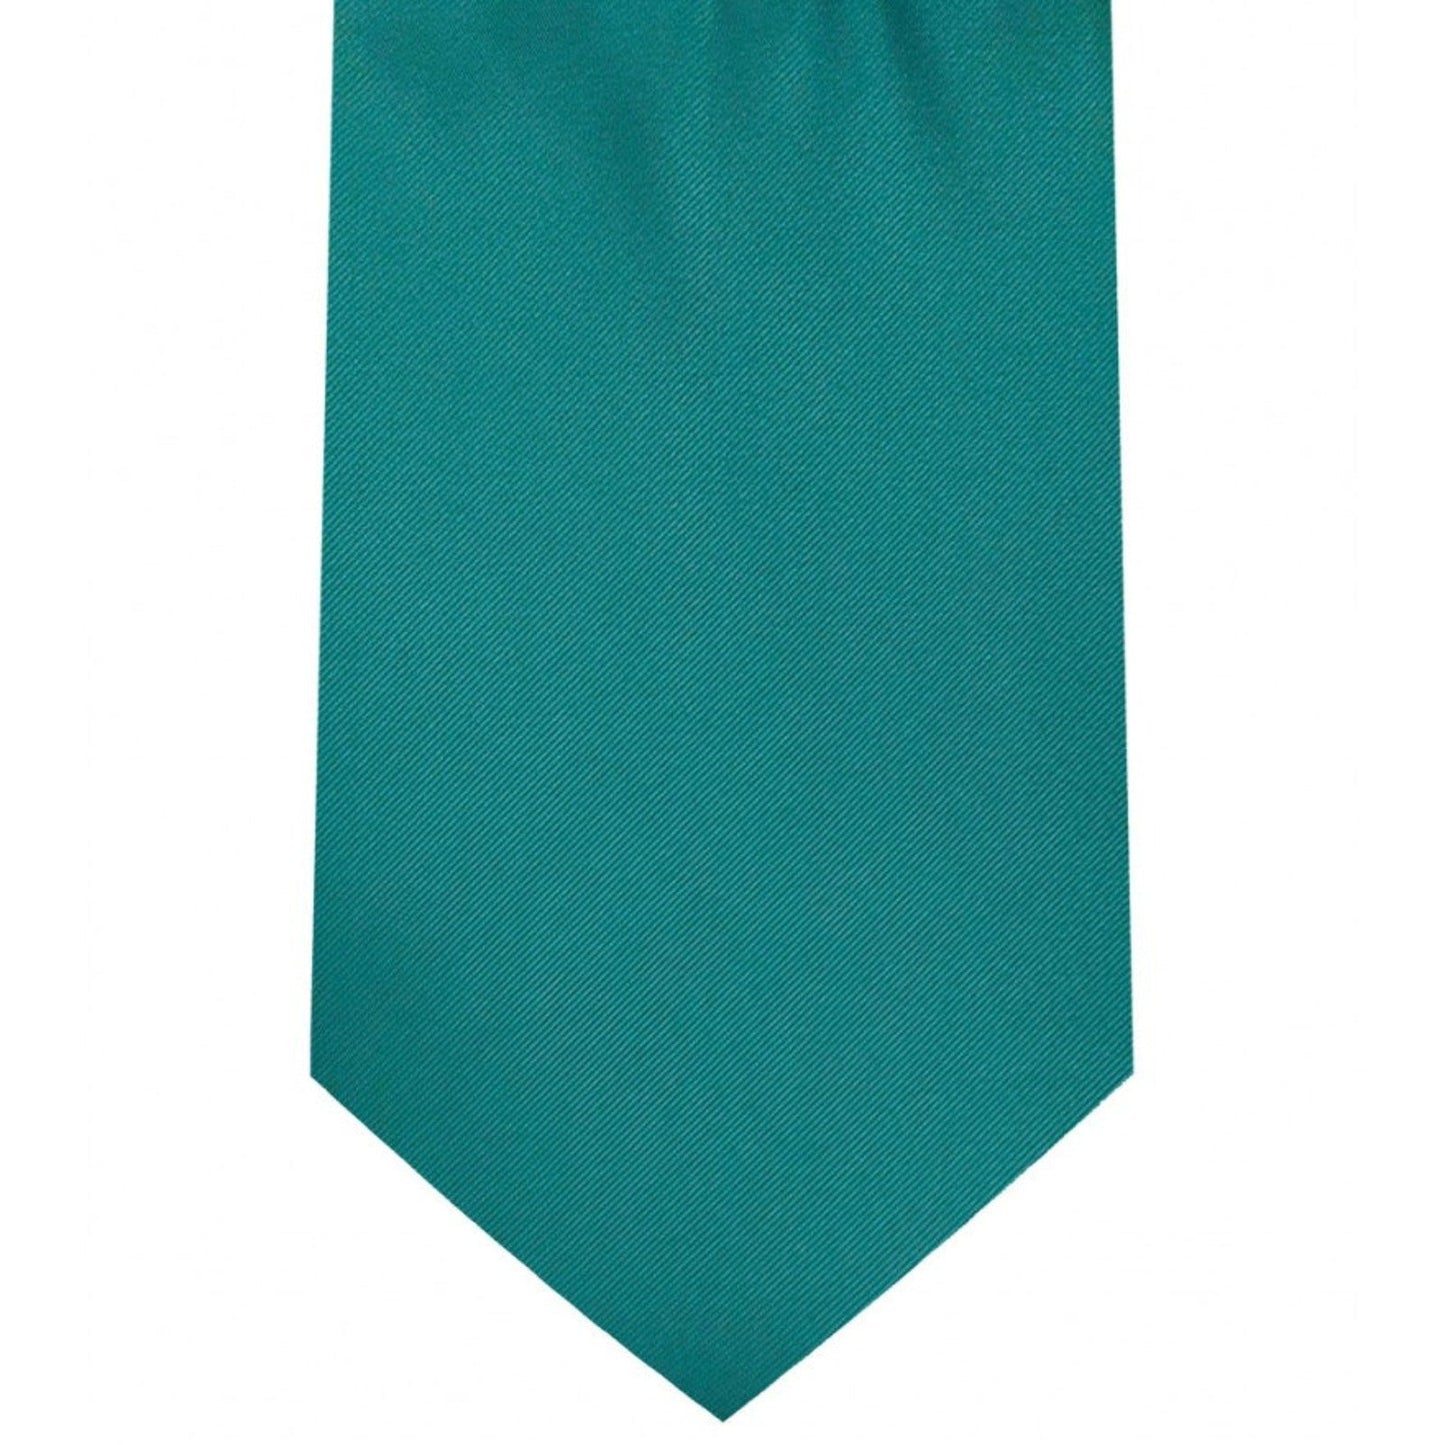 Classic Teal Tie Regular width 3.5 inches With Matching Pocket Square | KCT Menswear